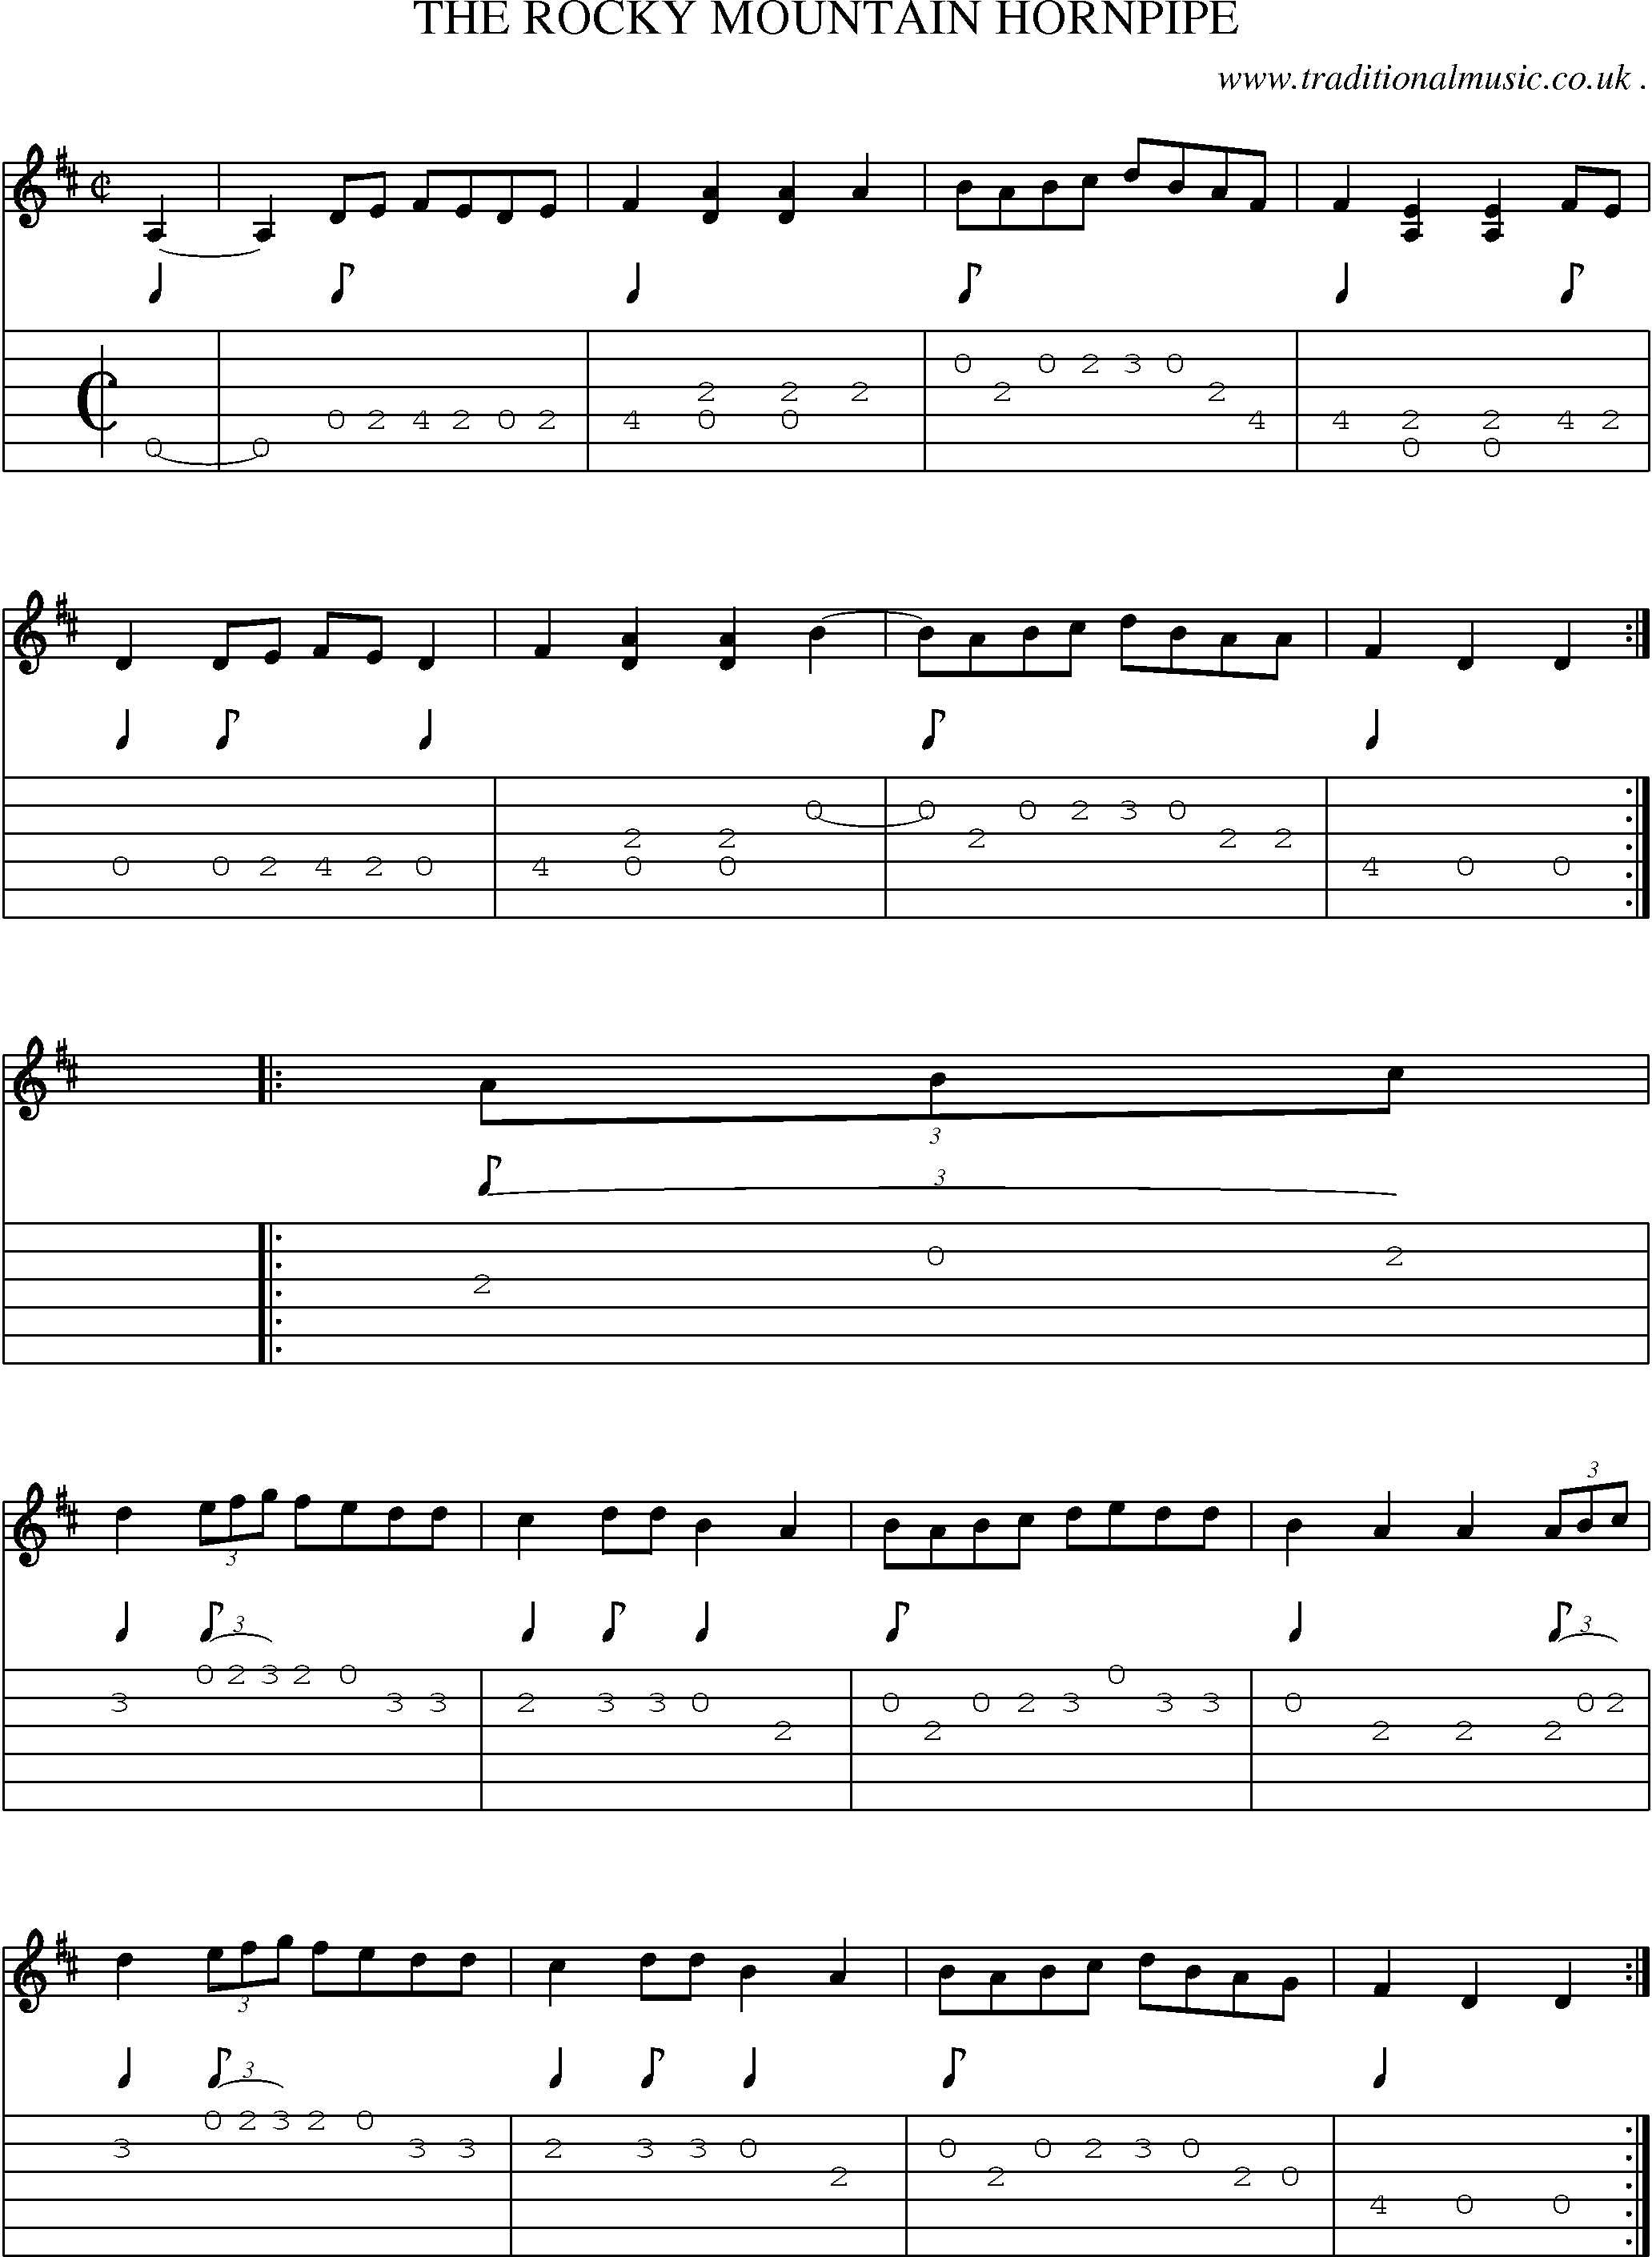 Music Score and Guitar Tabs for The Rocky Mountain Hornpipe